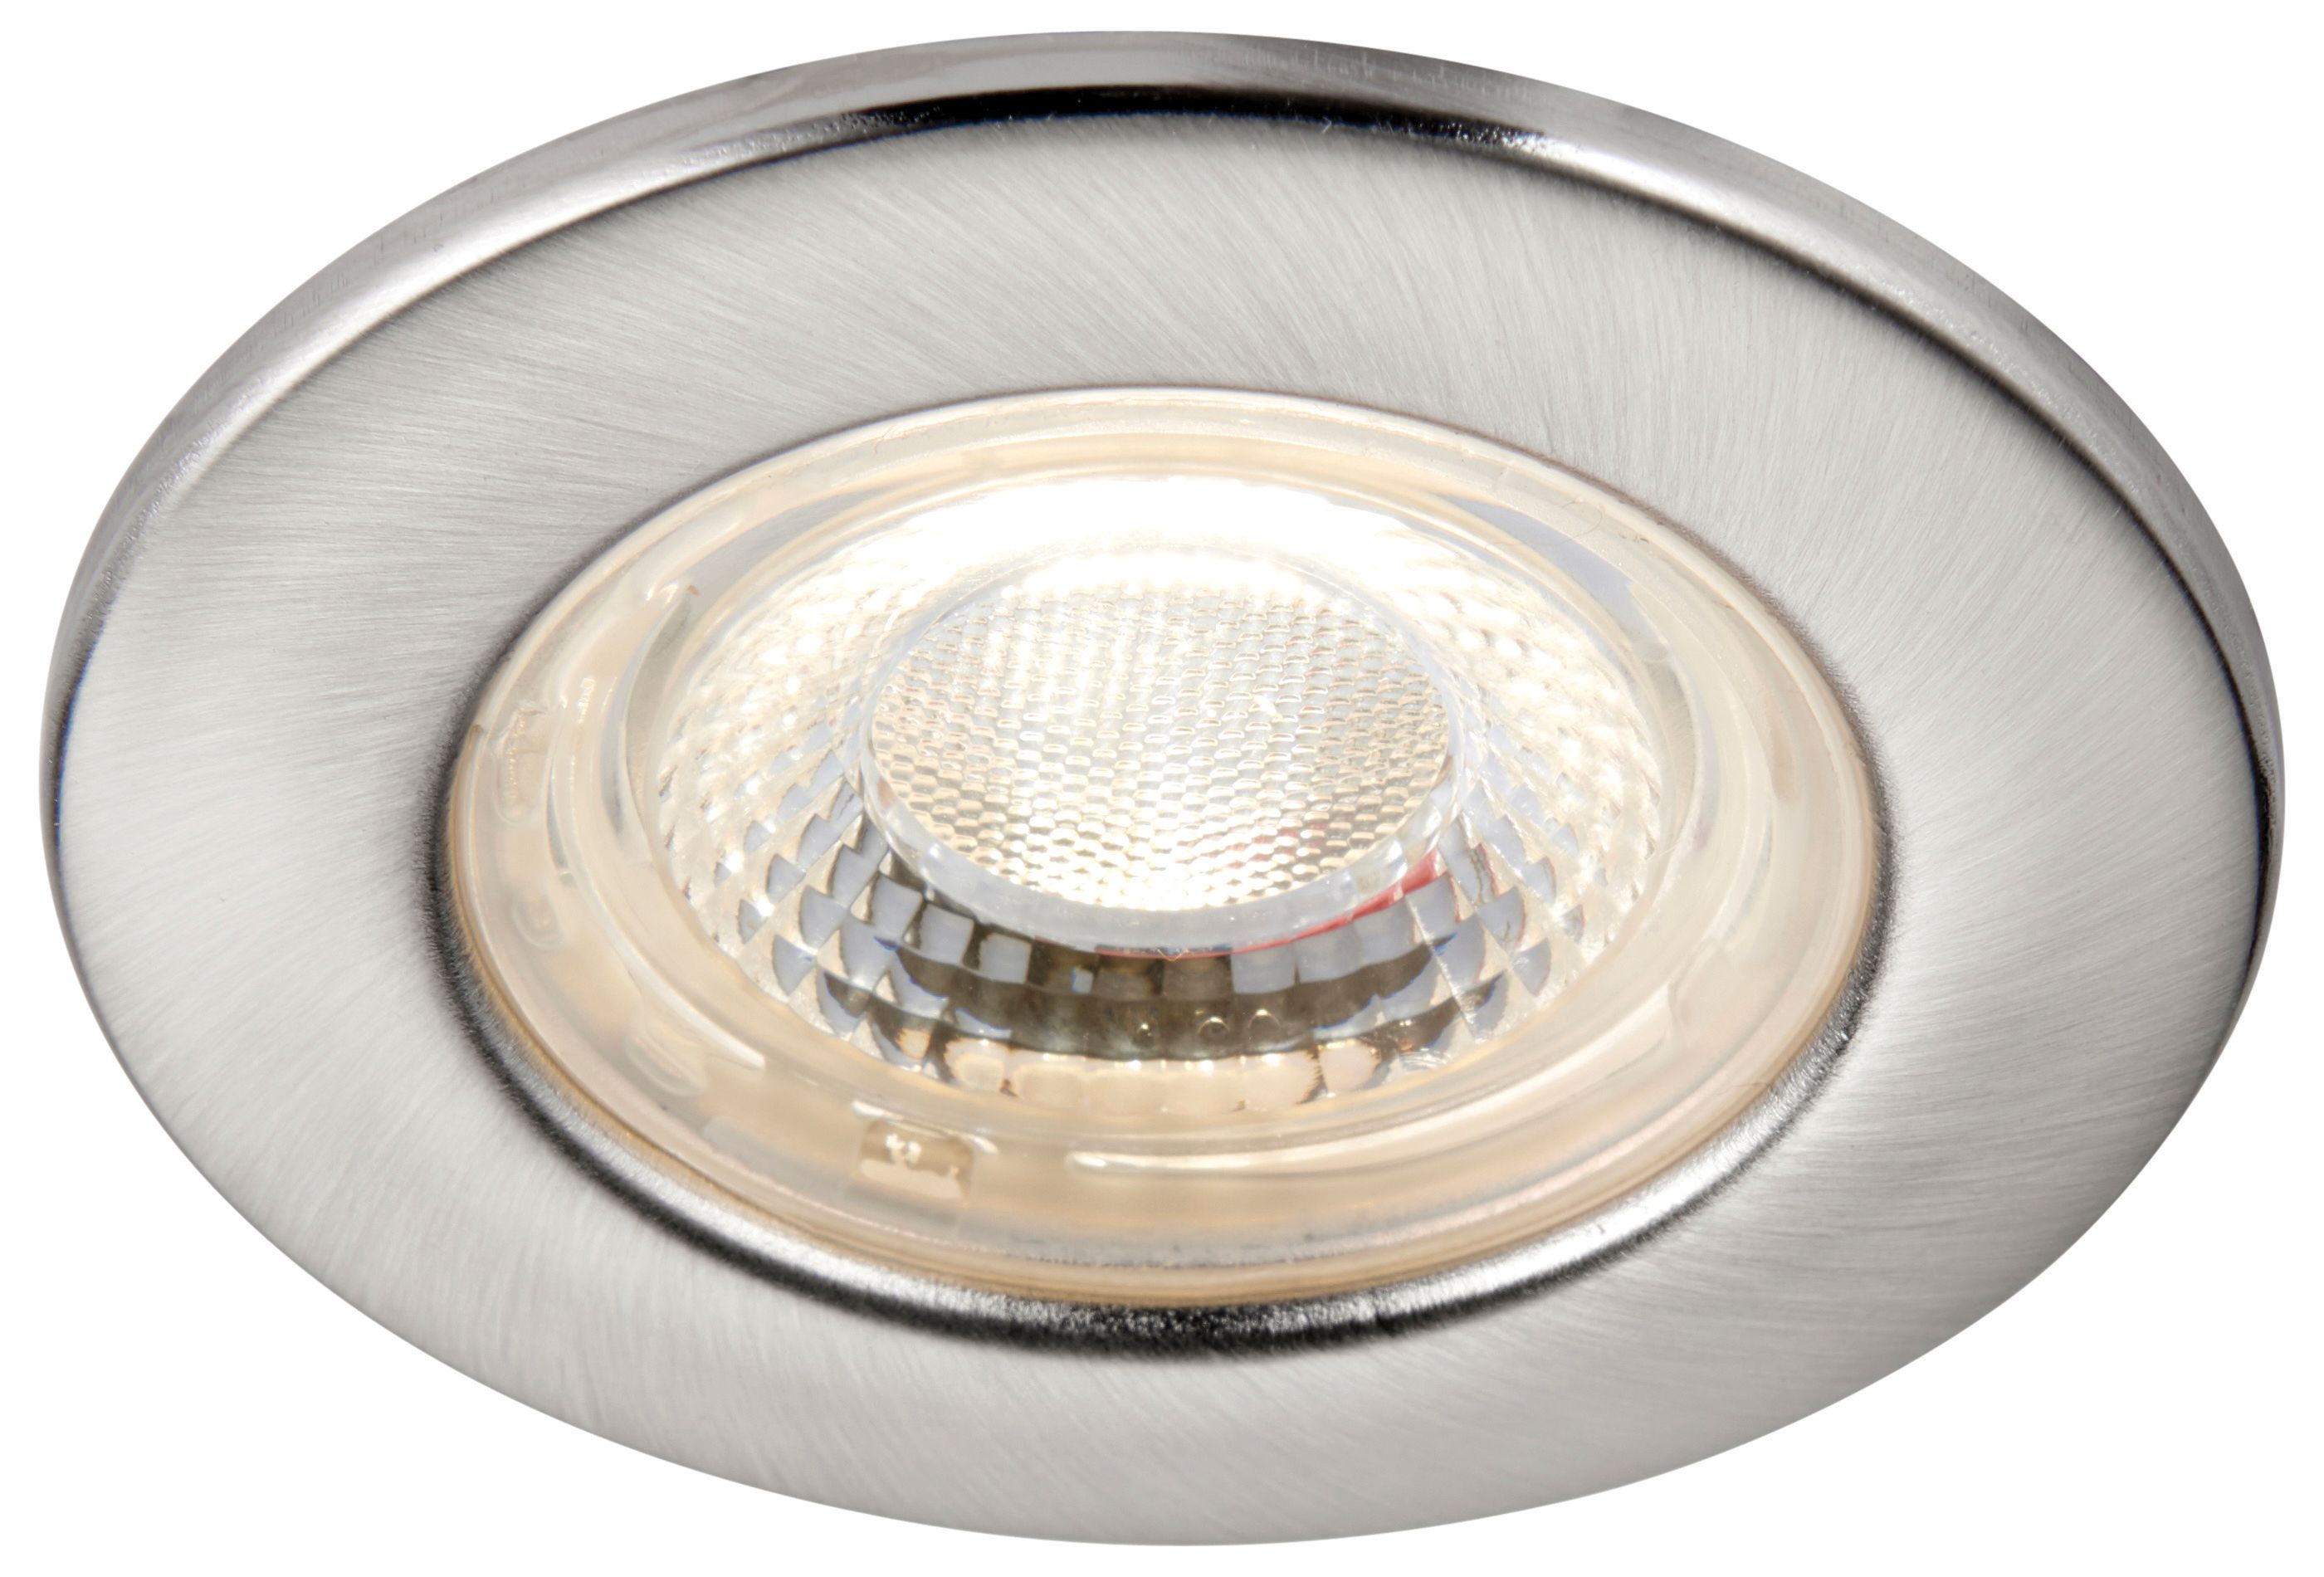 Saxby Integrated LED Fire Rated IP65 Cool White Dimmable Downlight 500lm - Brushed Nickel